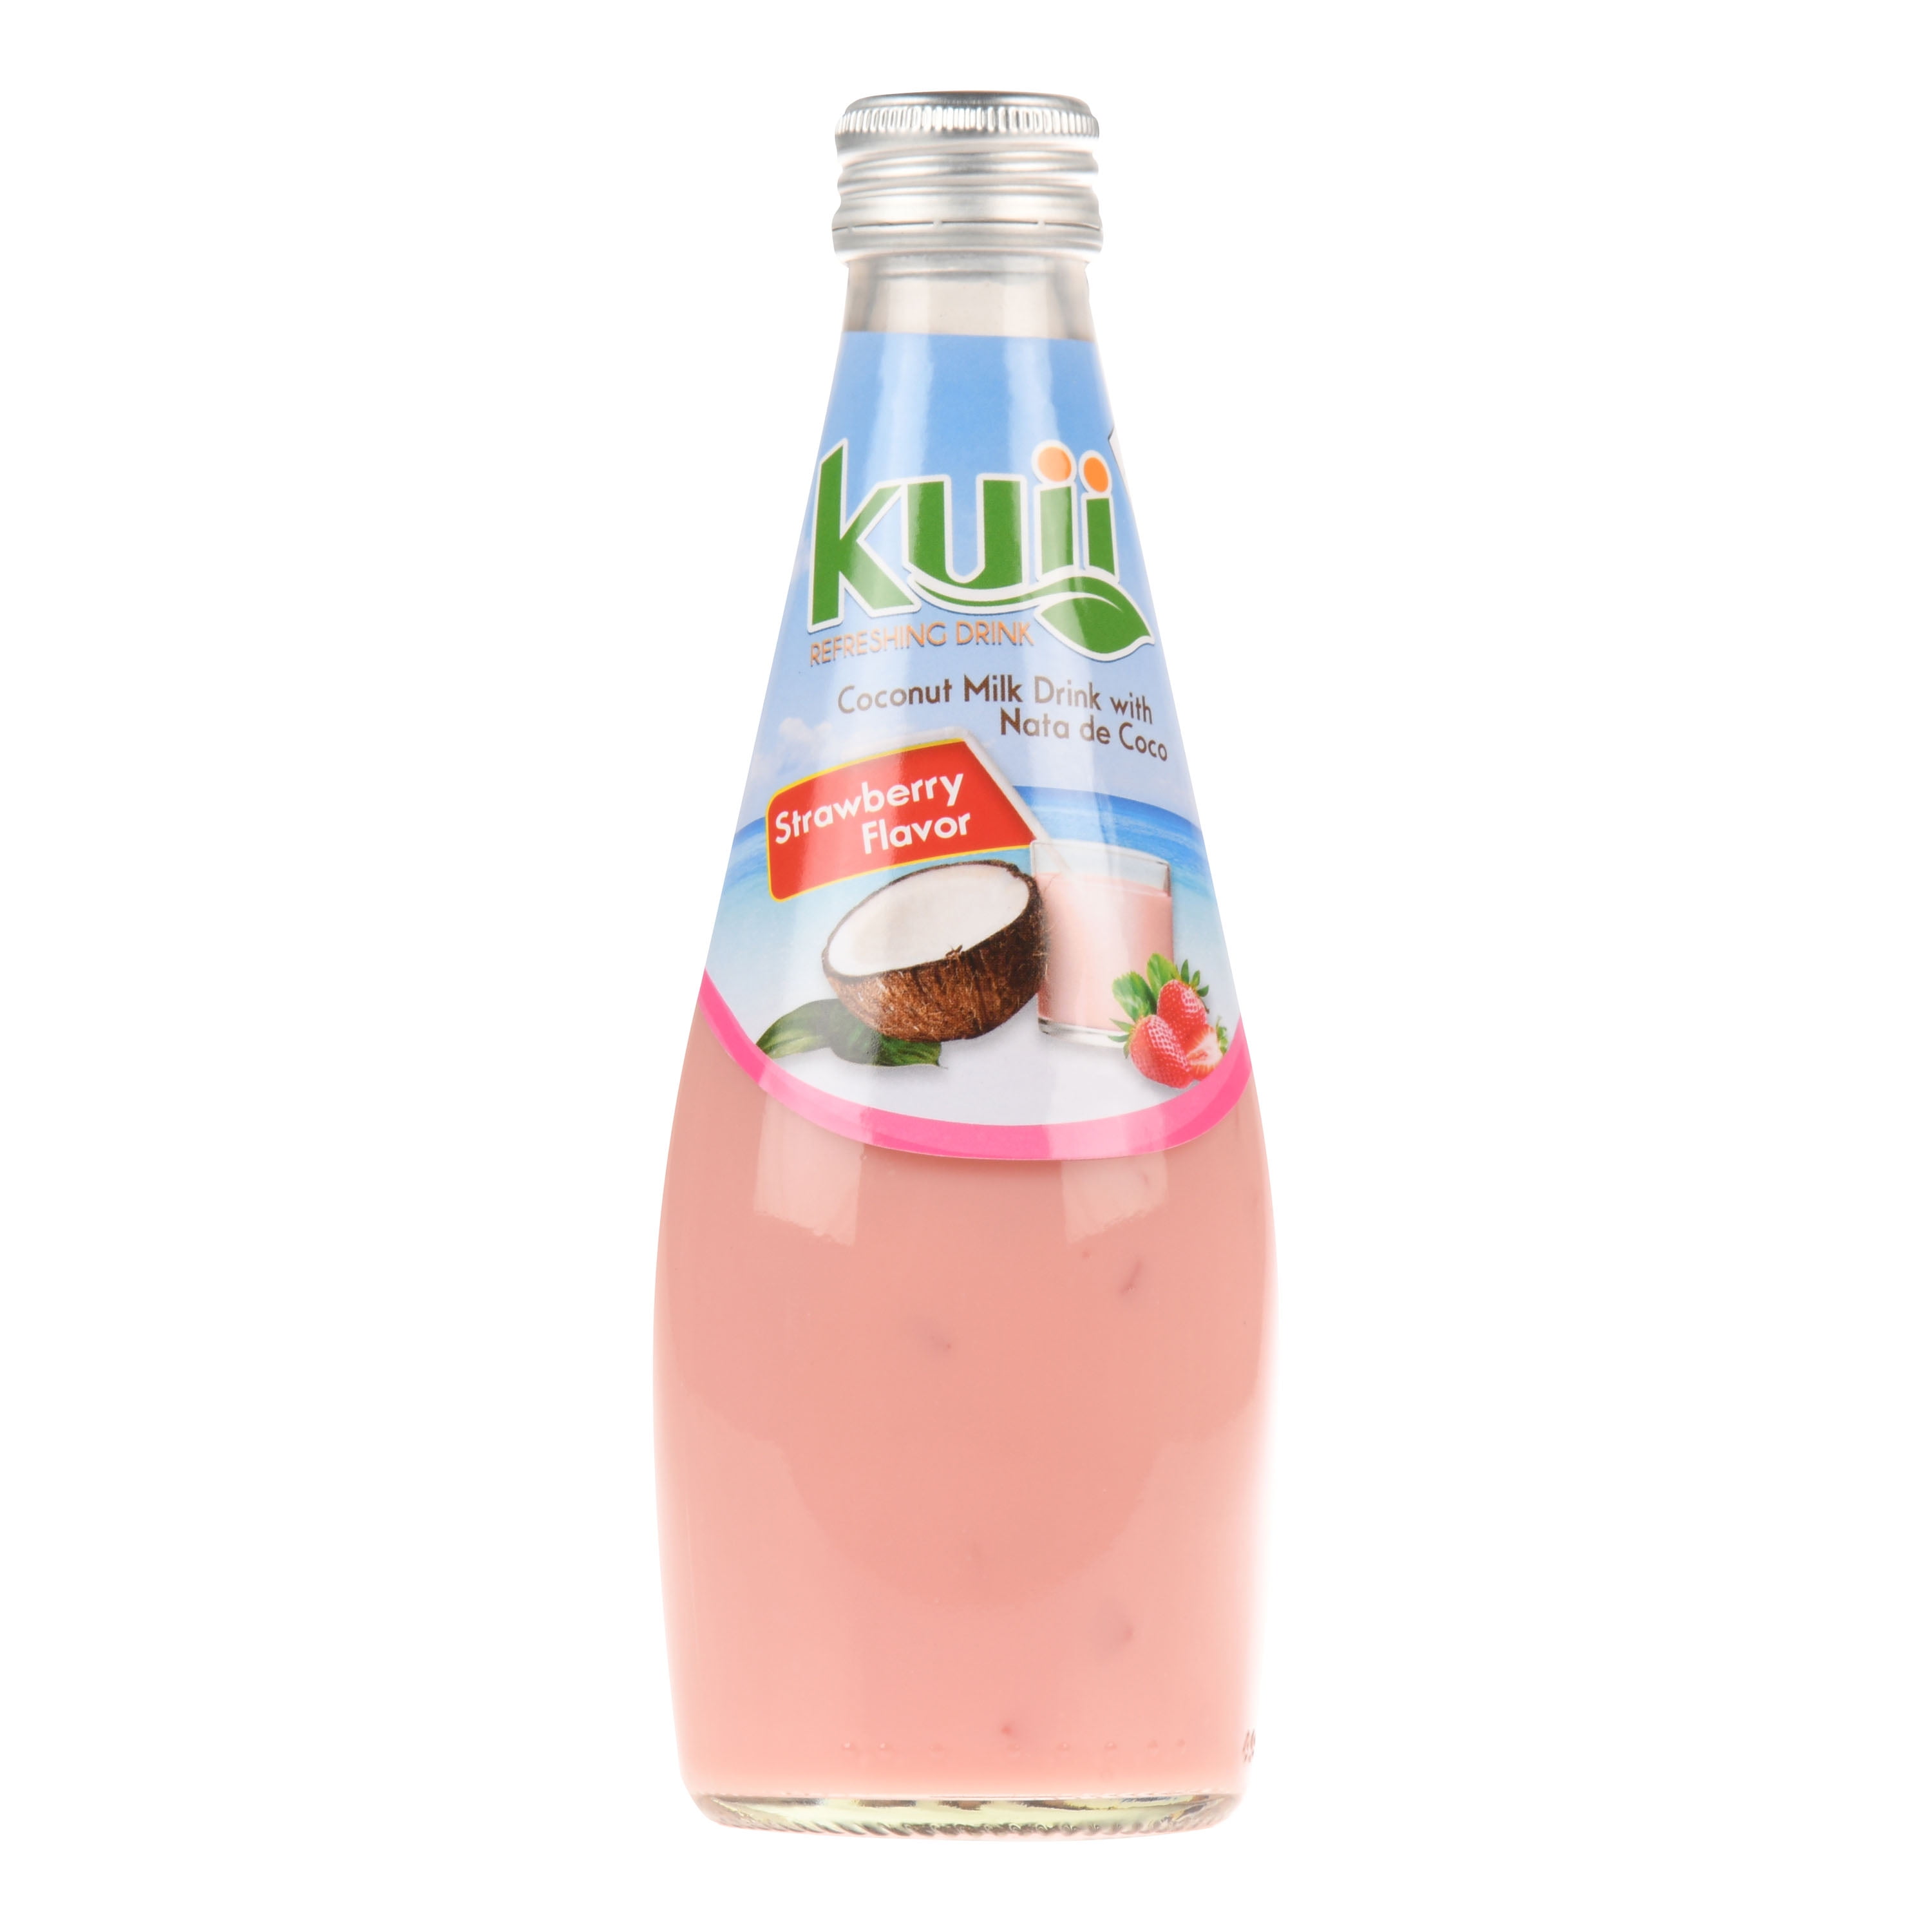 Top Kuii Nata De Coco of all time Don't miss out!